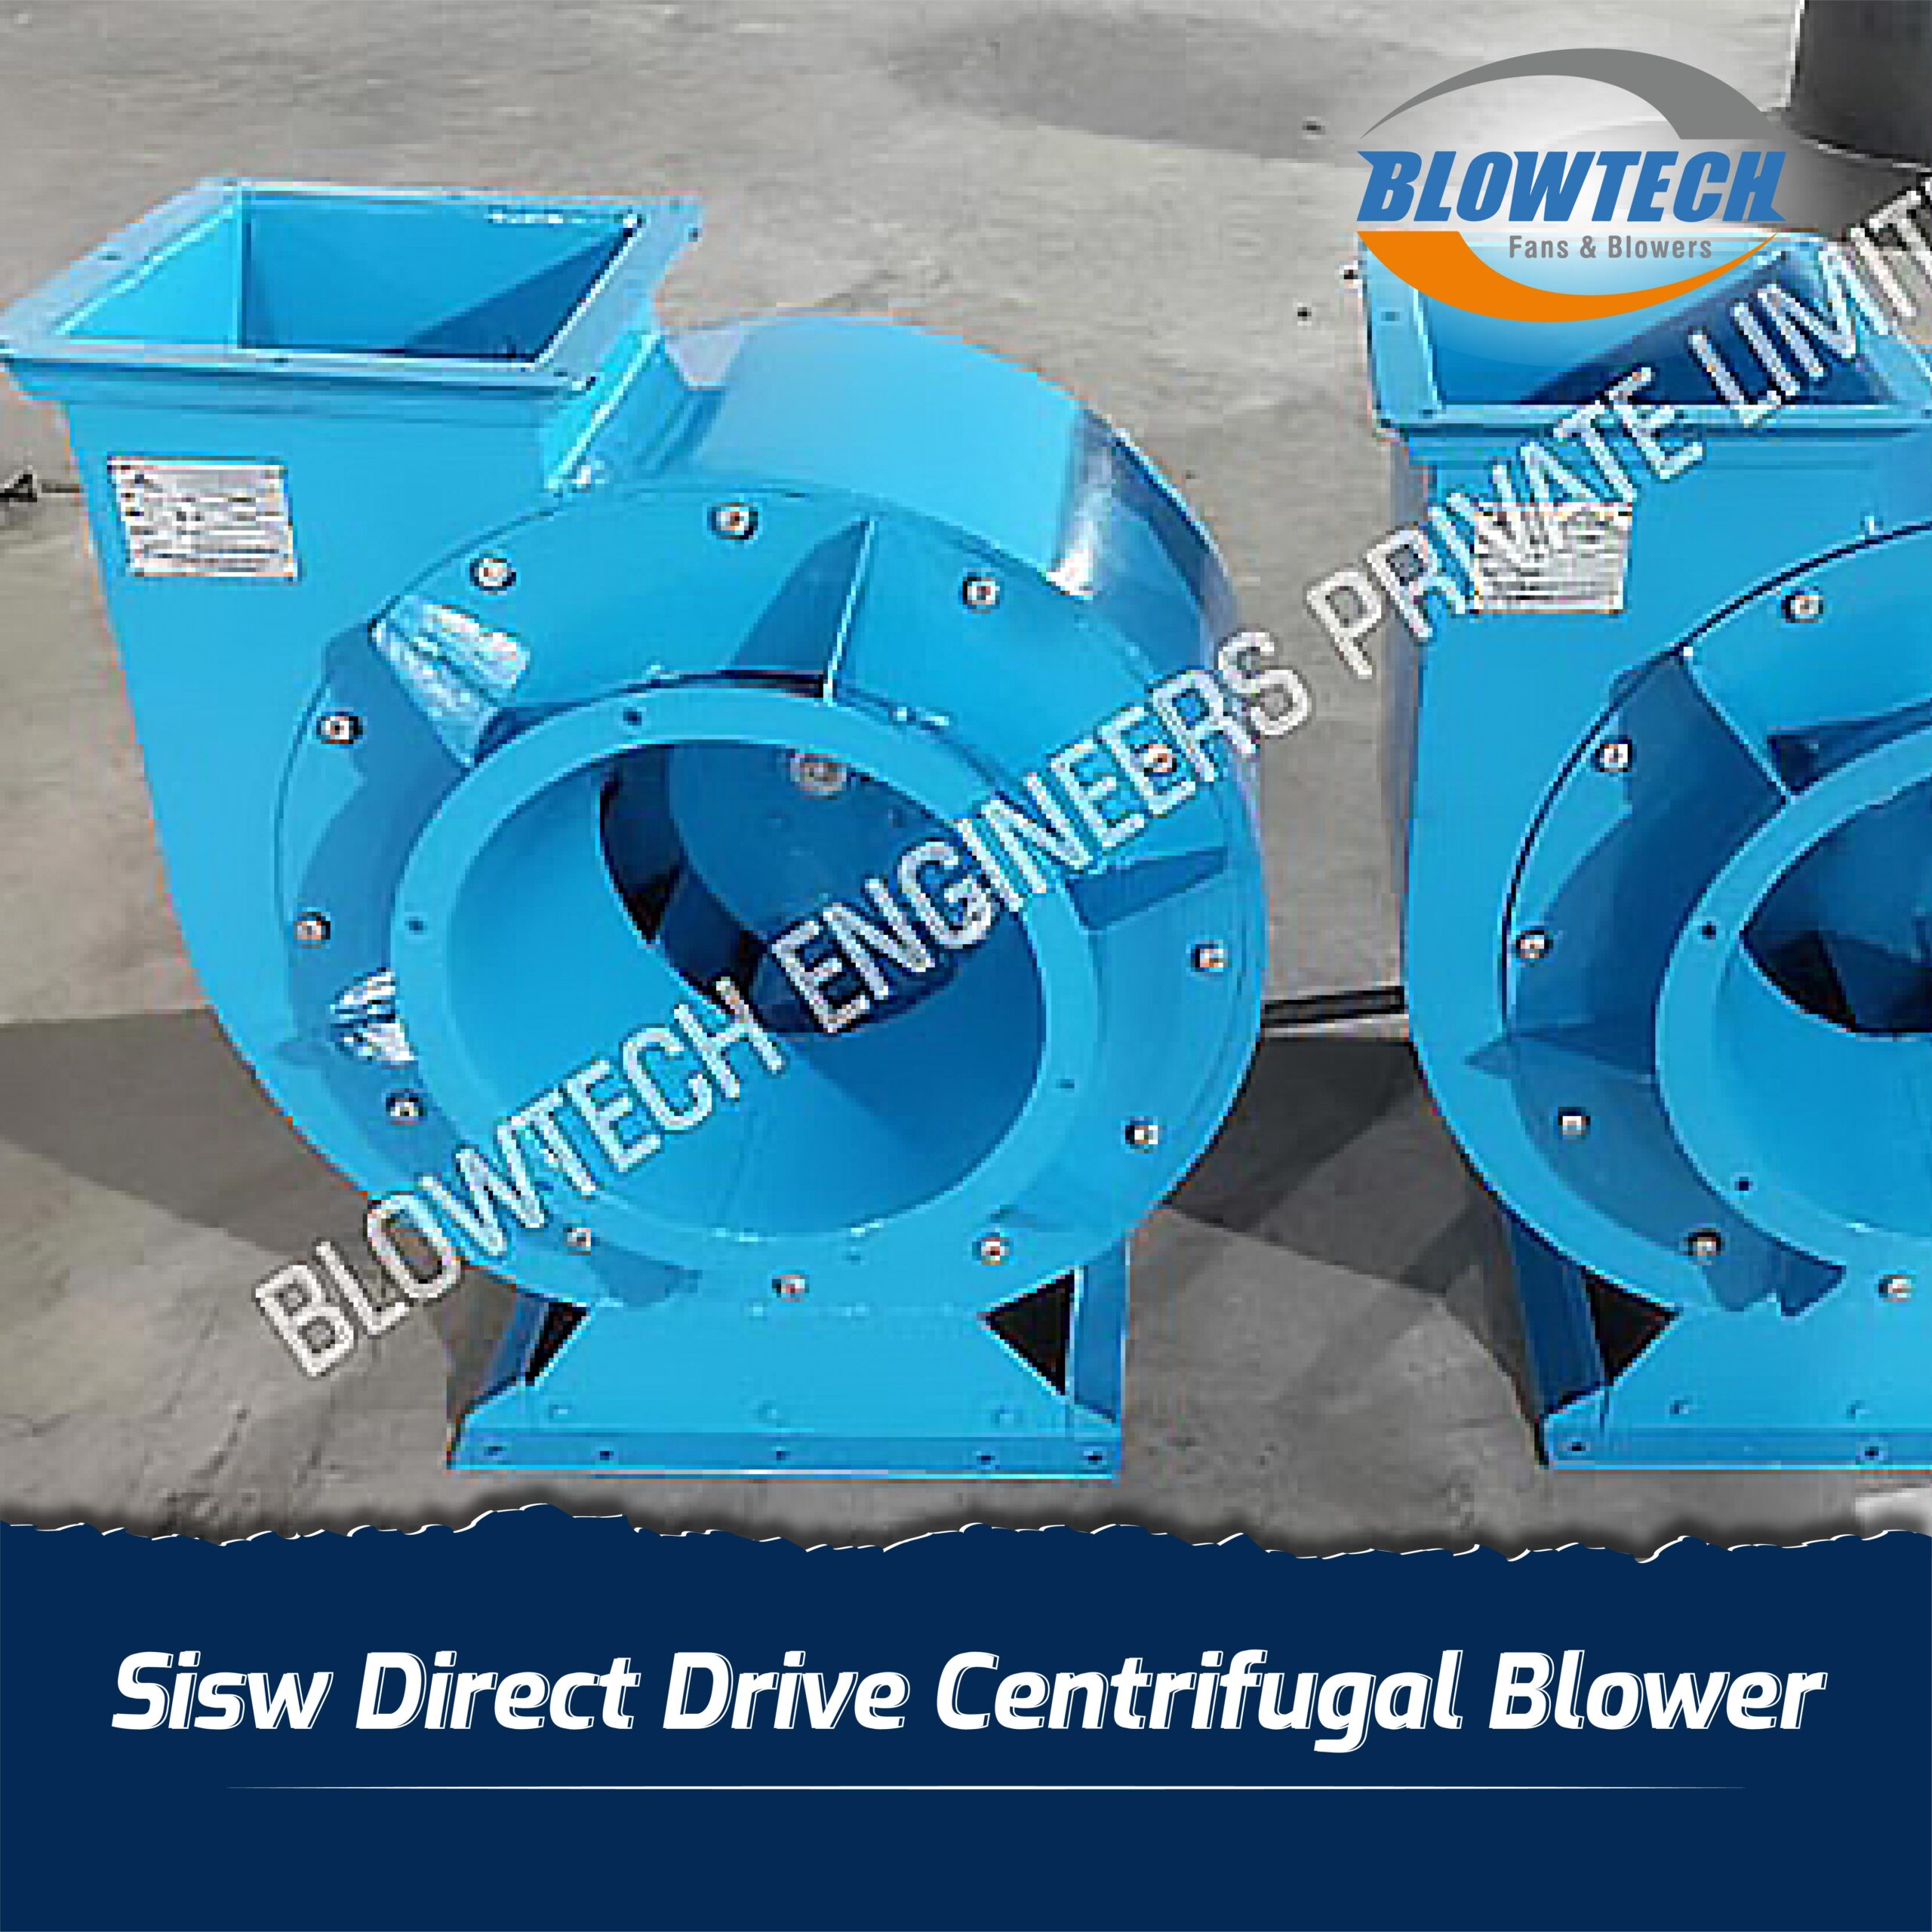 SISW Direct Drive Centrifugal Blower  manufacturer, supplier and exporter in Mumbai, India